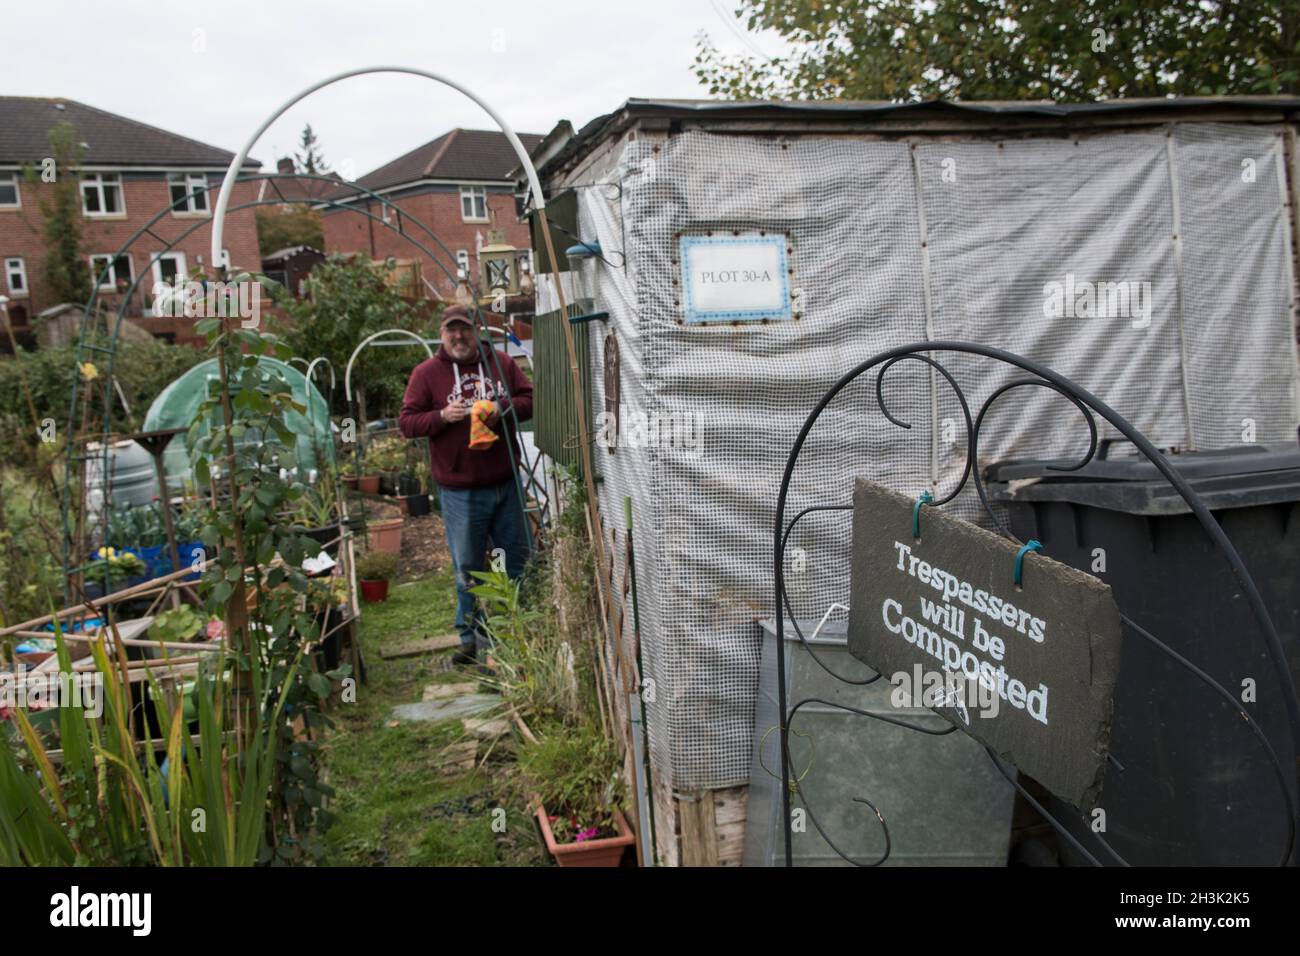 Allotments. Trespassers with be Composted, sign on allotment gate. Wingfield Road Allotments Bristol 2021 2020S UK HOMER SYKES Stock Photo